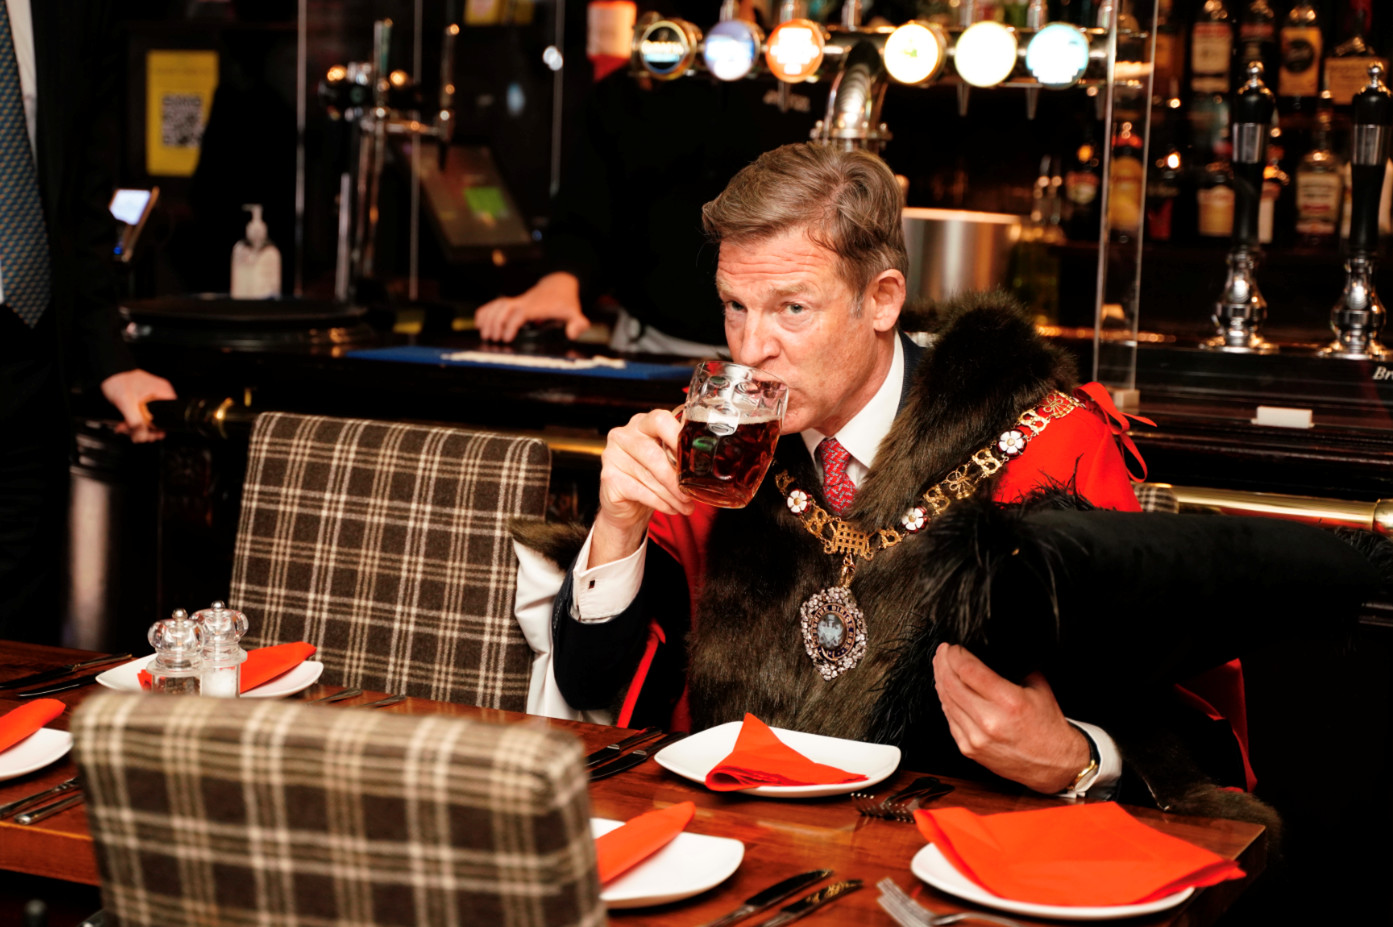 The Lord Mayor enjoys a sip of a freshly poured pint of Shepherd Neame's Spitfire Amber ale